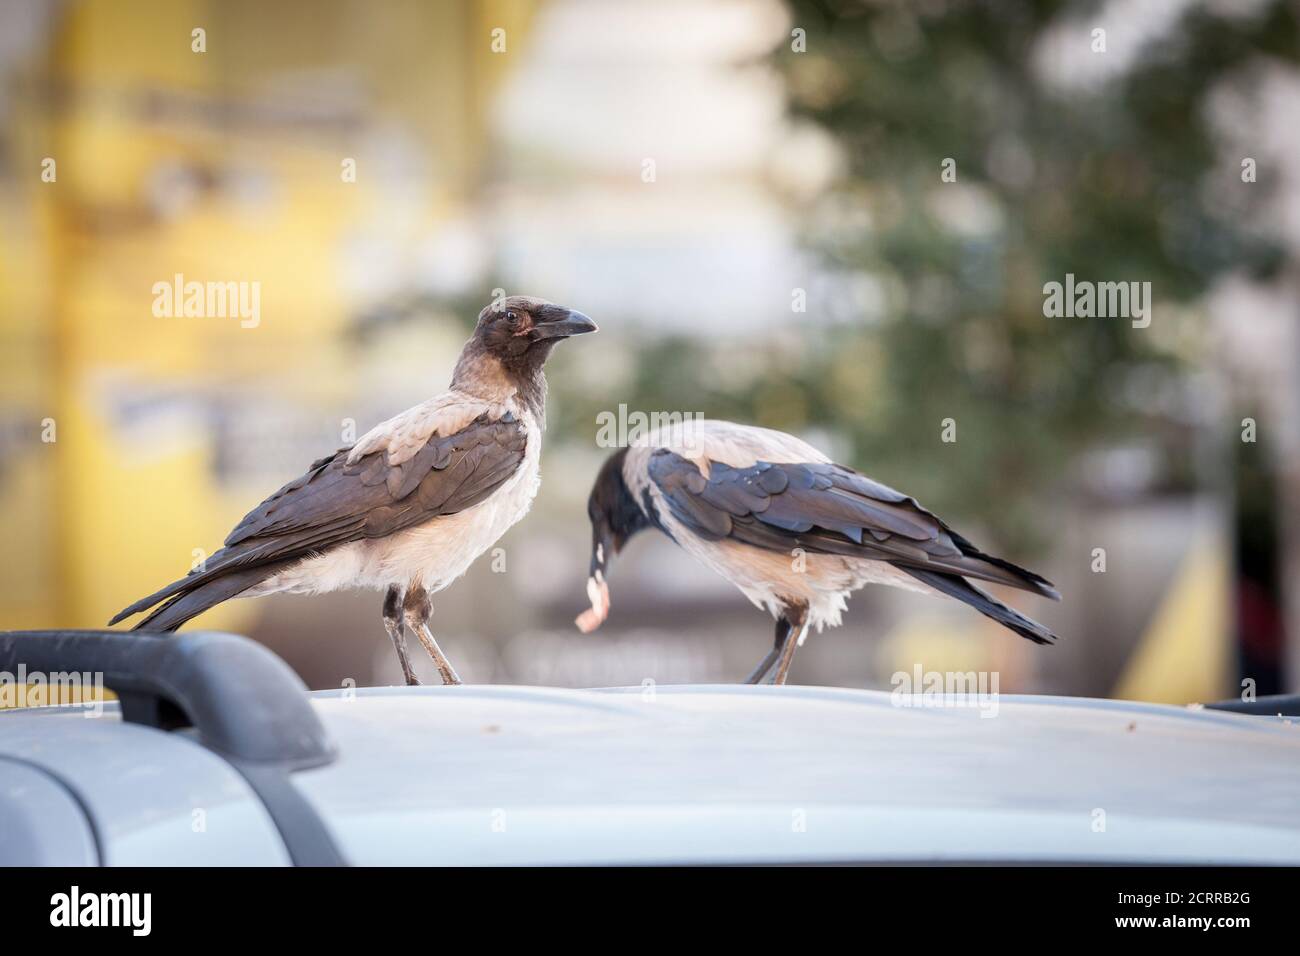 Focus on a hooded crow, a black and grey crow bird from the corvidae family, also called Corvus Cornix, standing while another one, blurry, is eating Stock Photo